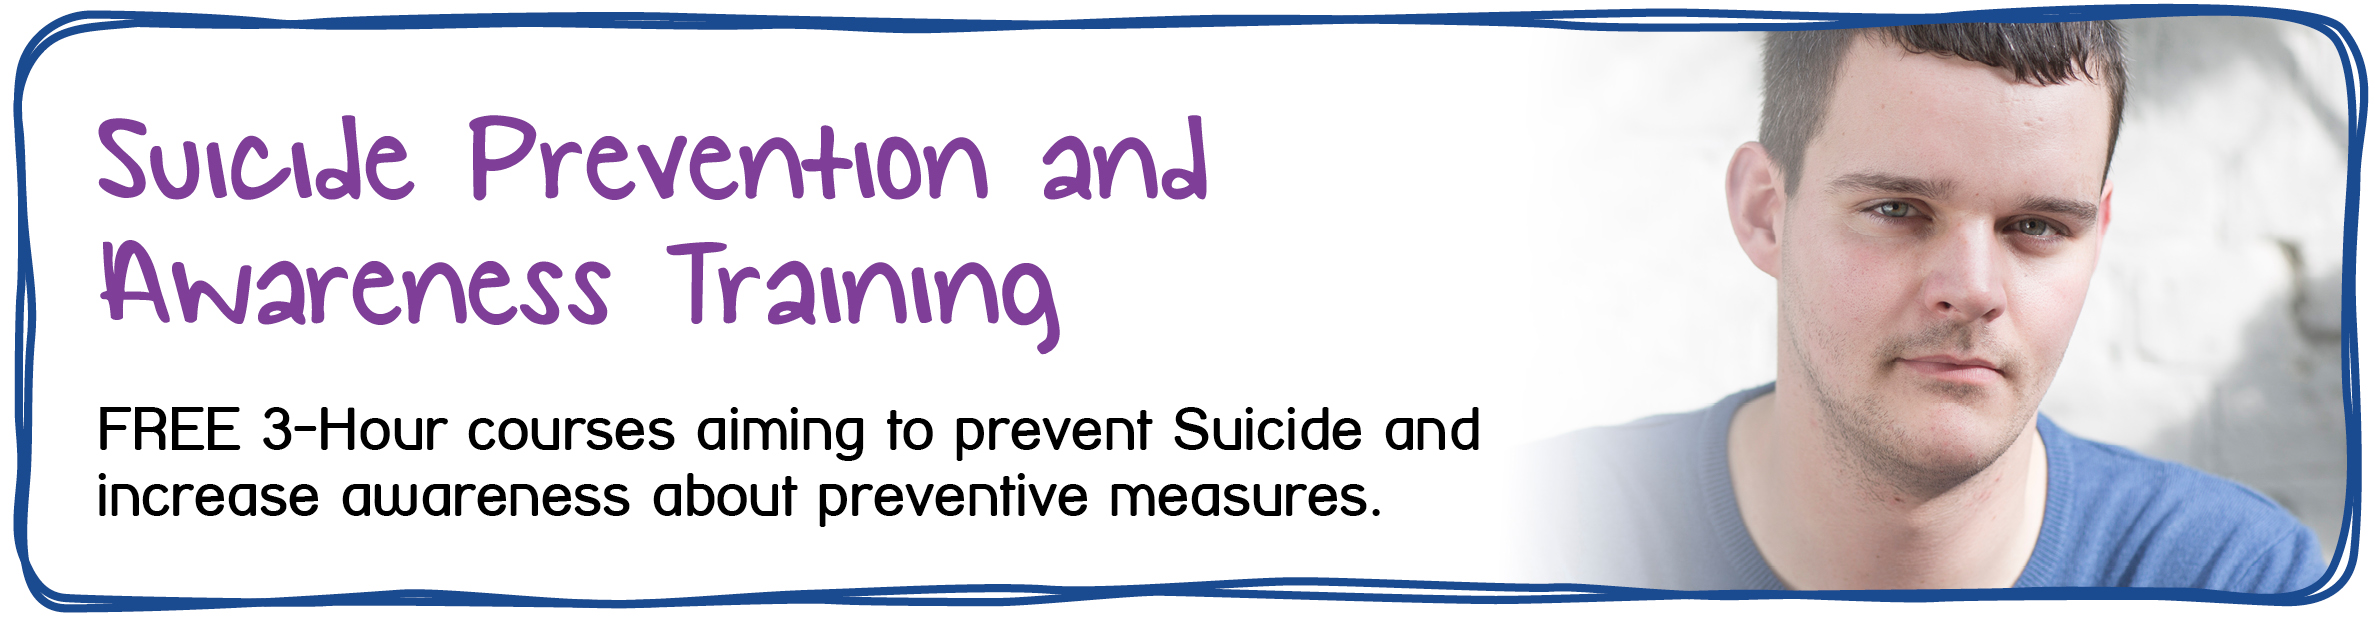 Suicide Prevention & Awareness - Free 3-hour courses aiming to prevent suicide and increase awareness about preventive measures.